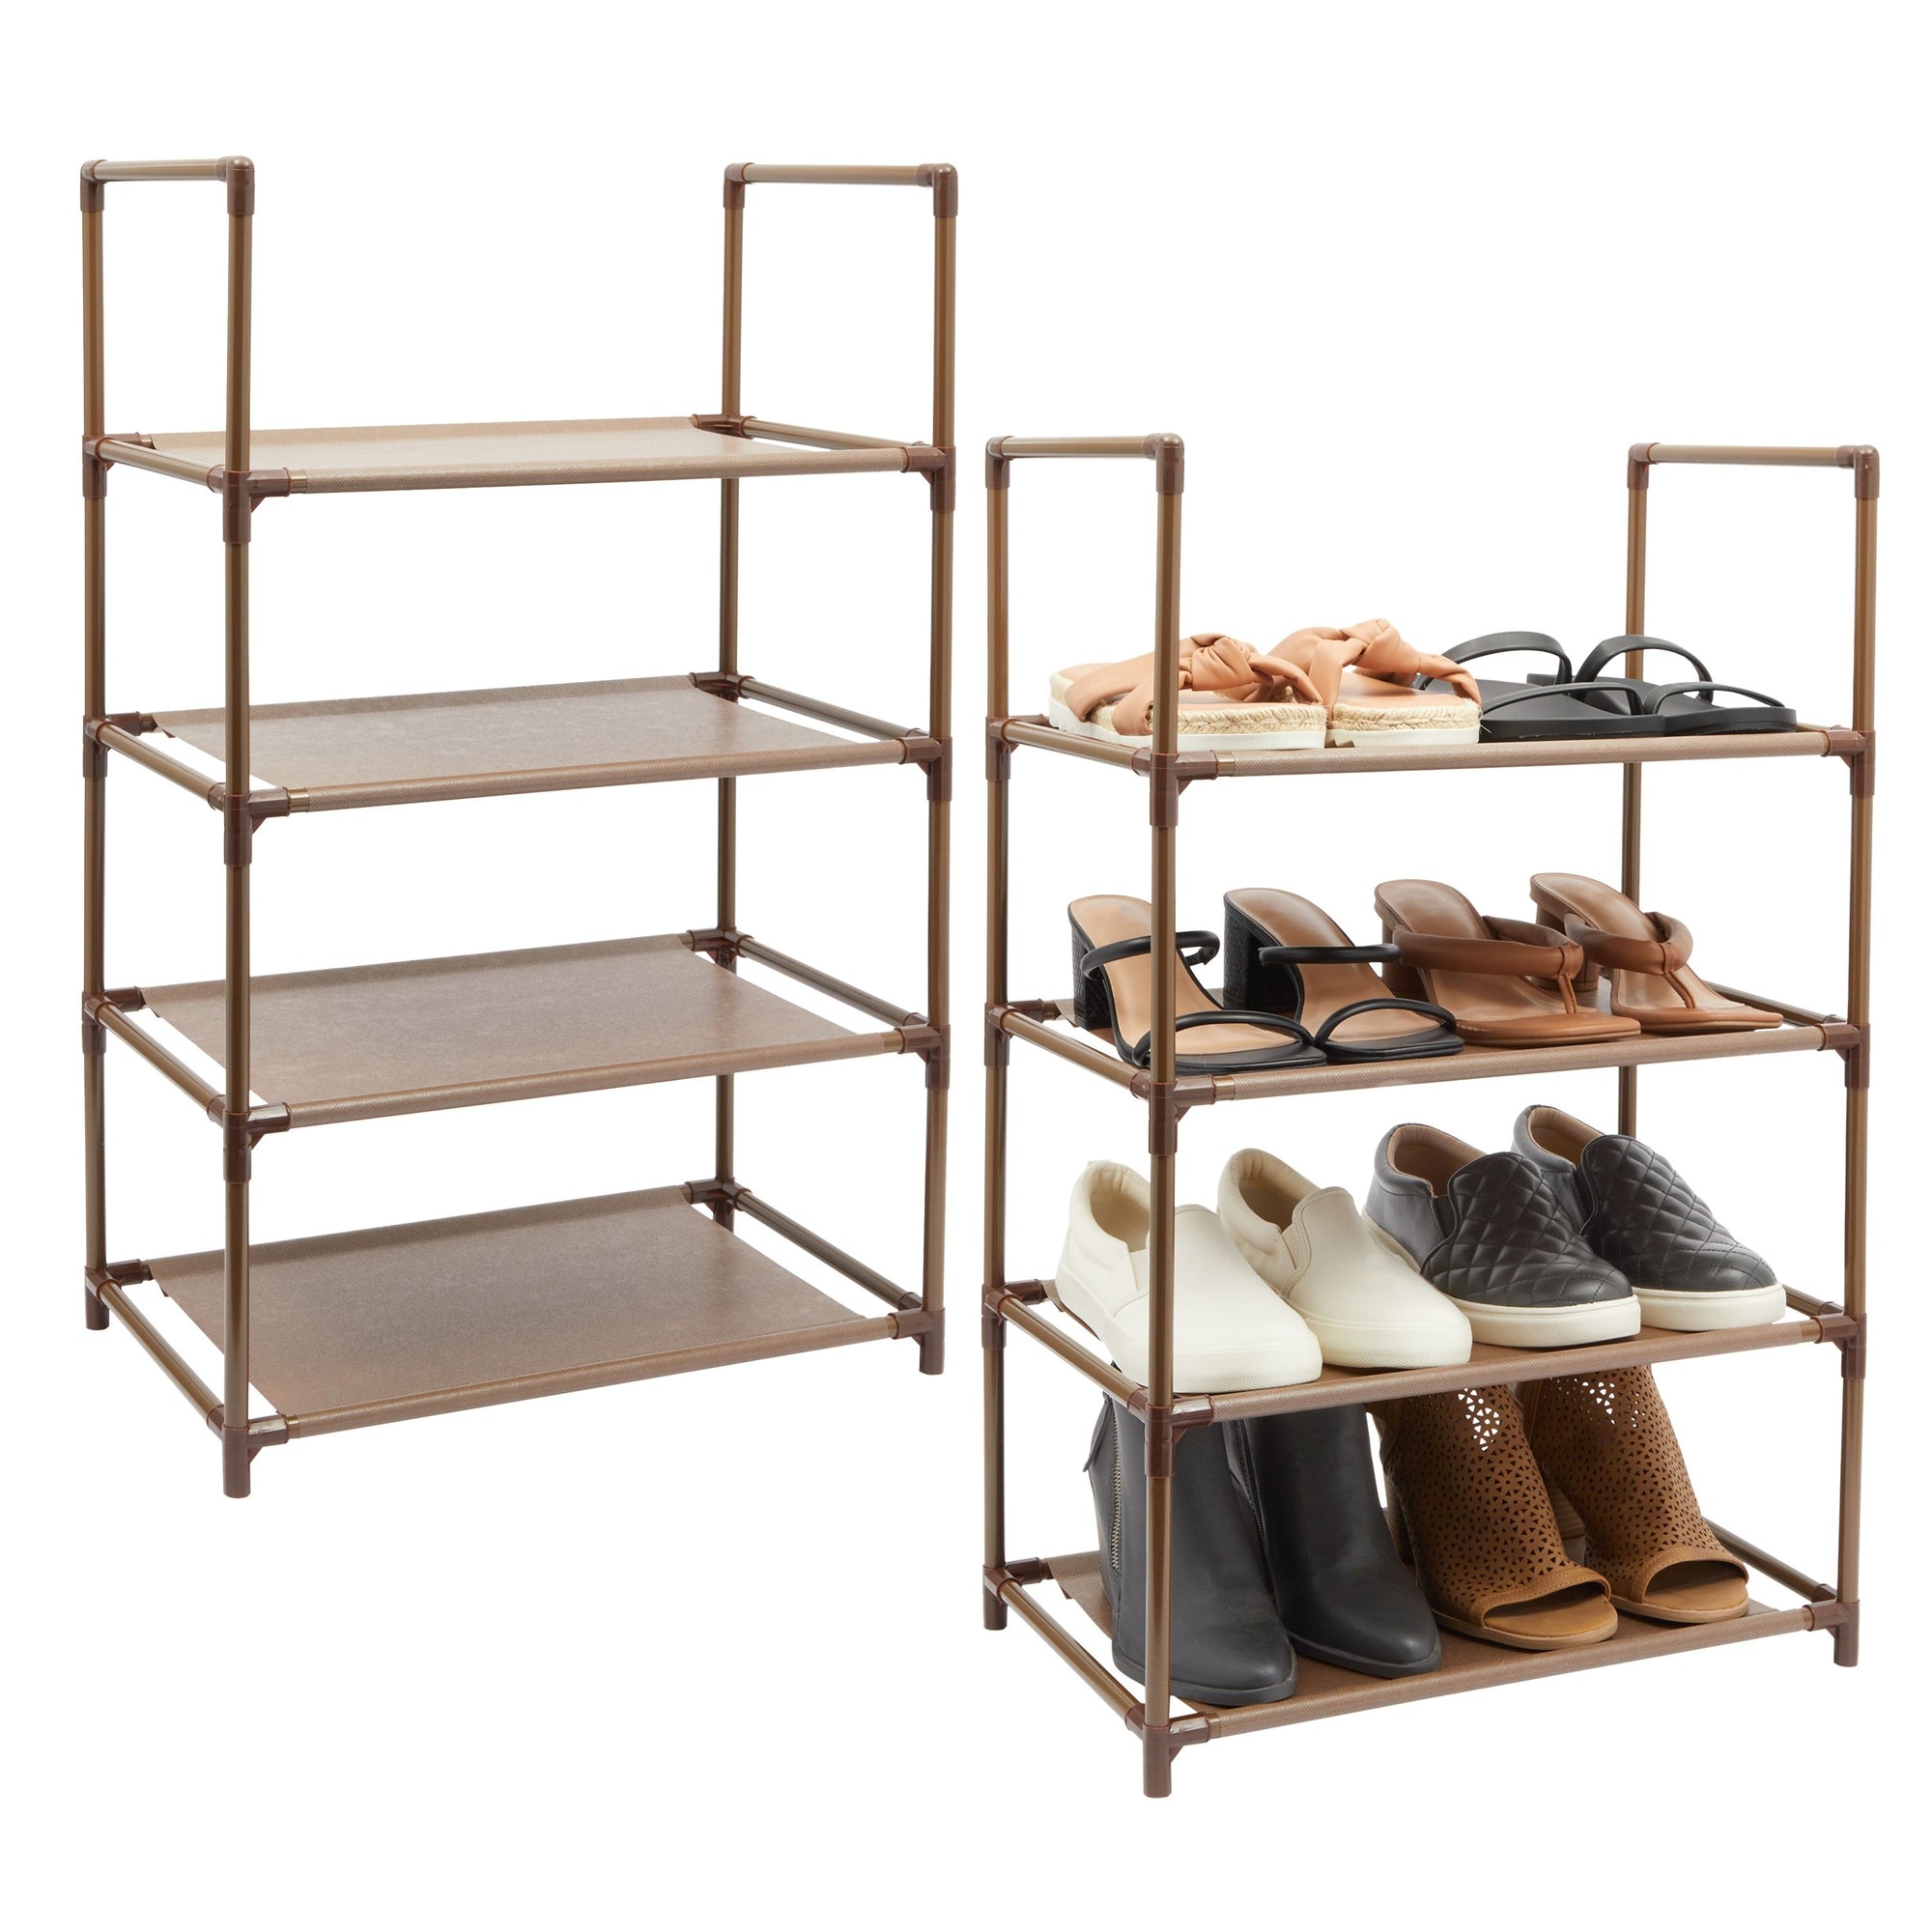 GUANJUNE 4 Tier Extendable Shoe Rack Organizer,Heavy Duty Metal Shelf  Organize Holds upto 20 Pairs Shoes,Space Saver Rack for Wardrobe